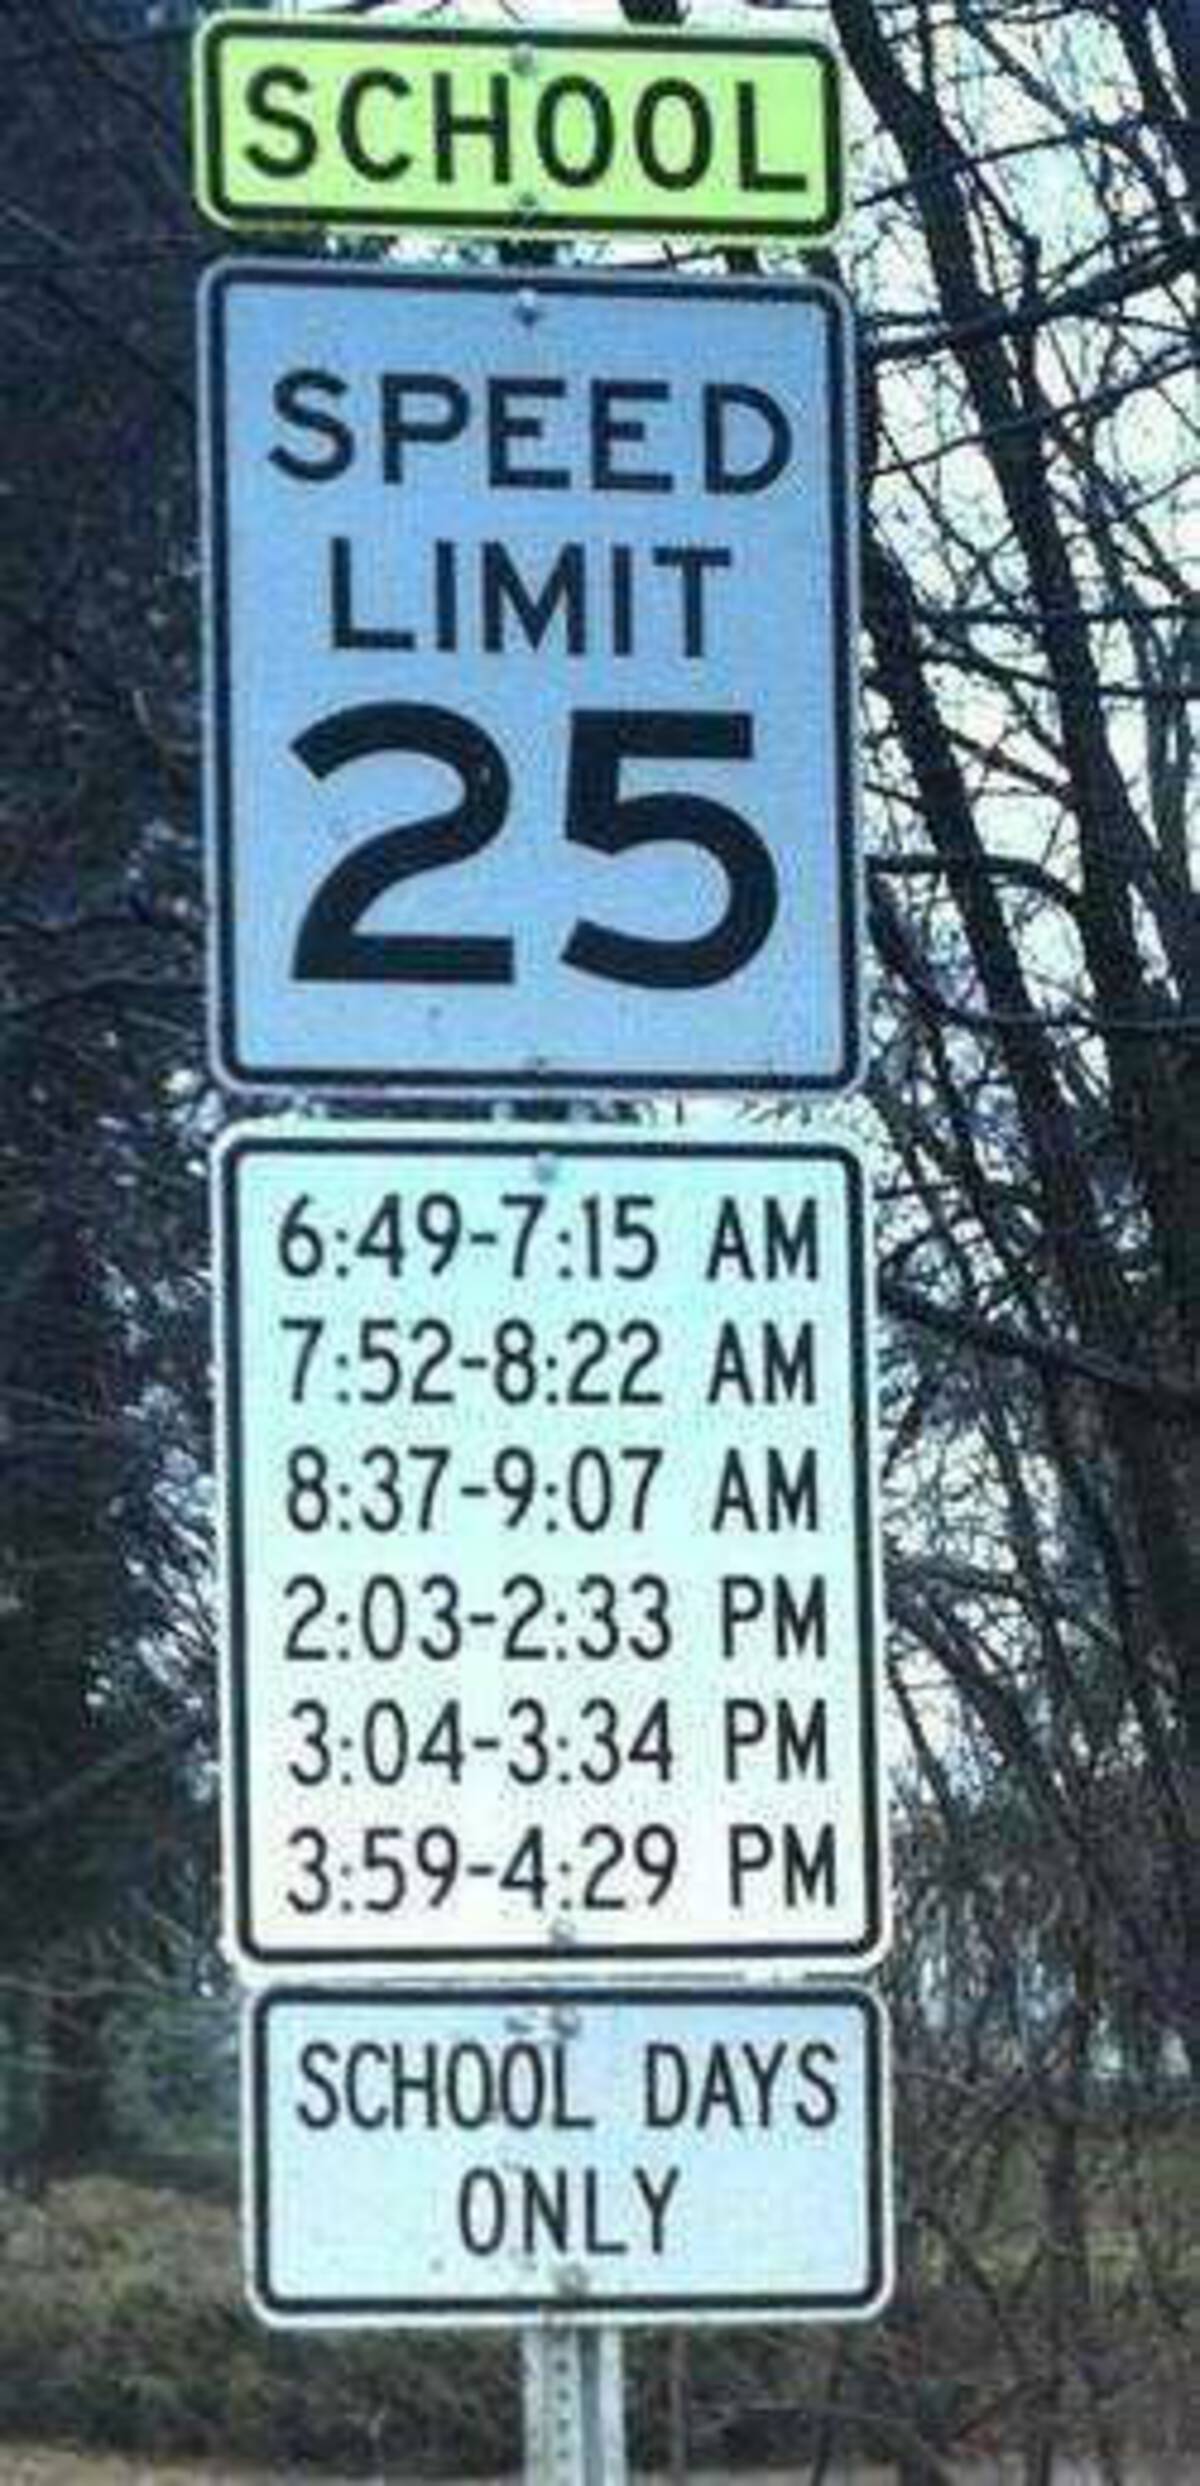 complicated signs - School Speed Limit 25 School Days Only